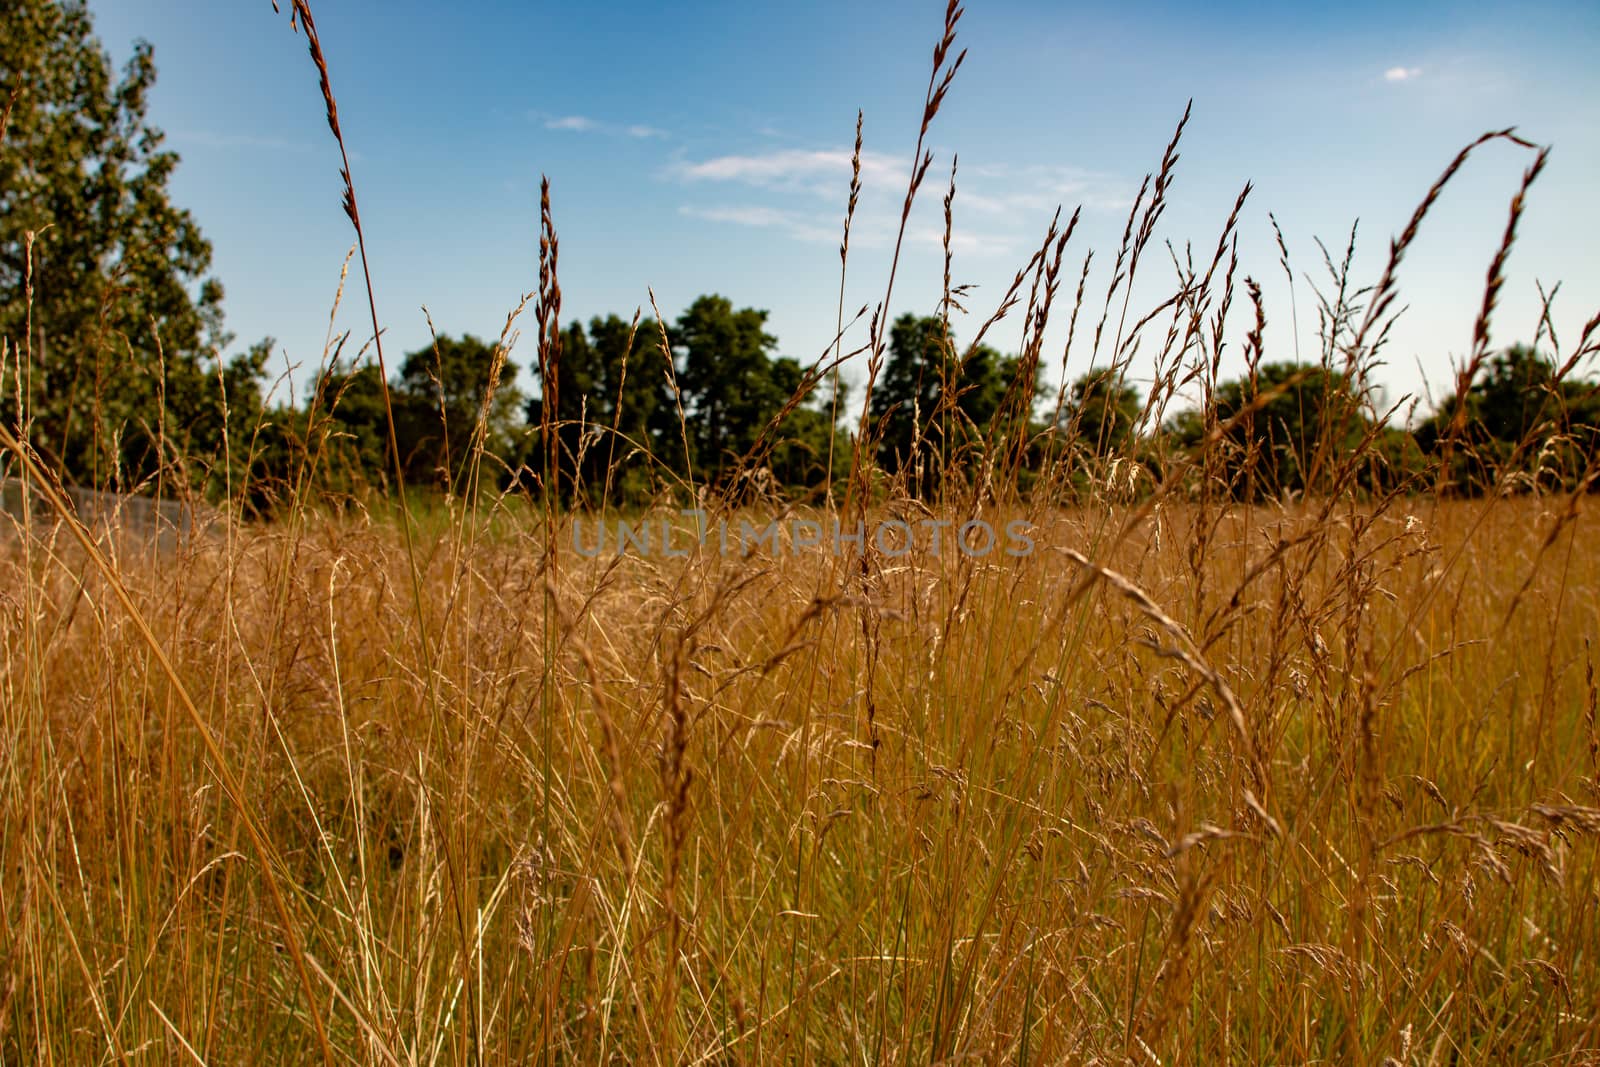 Long grass landscape type photo. Room for copy space. Photo shows beauty of Ontario nature by mynewturtle1